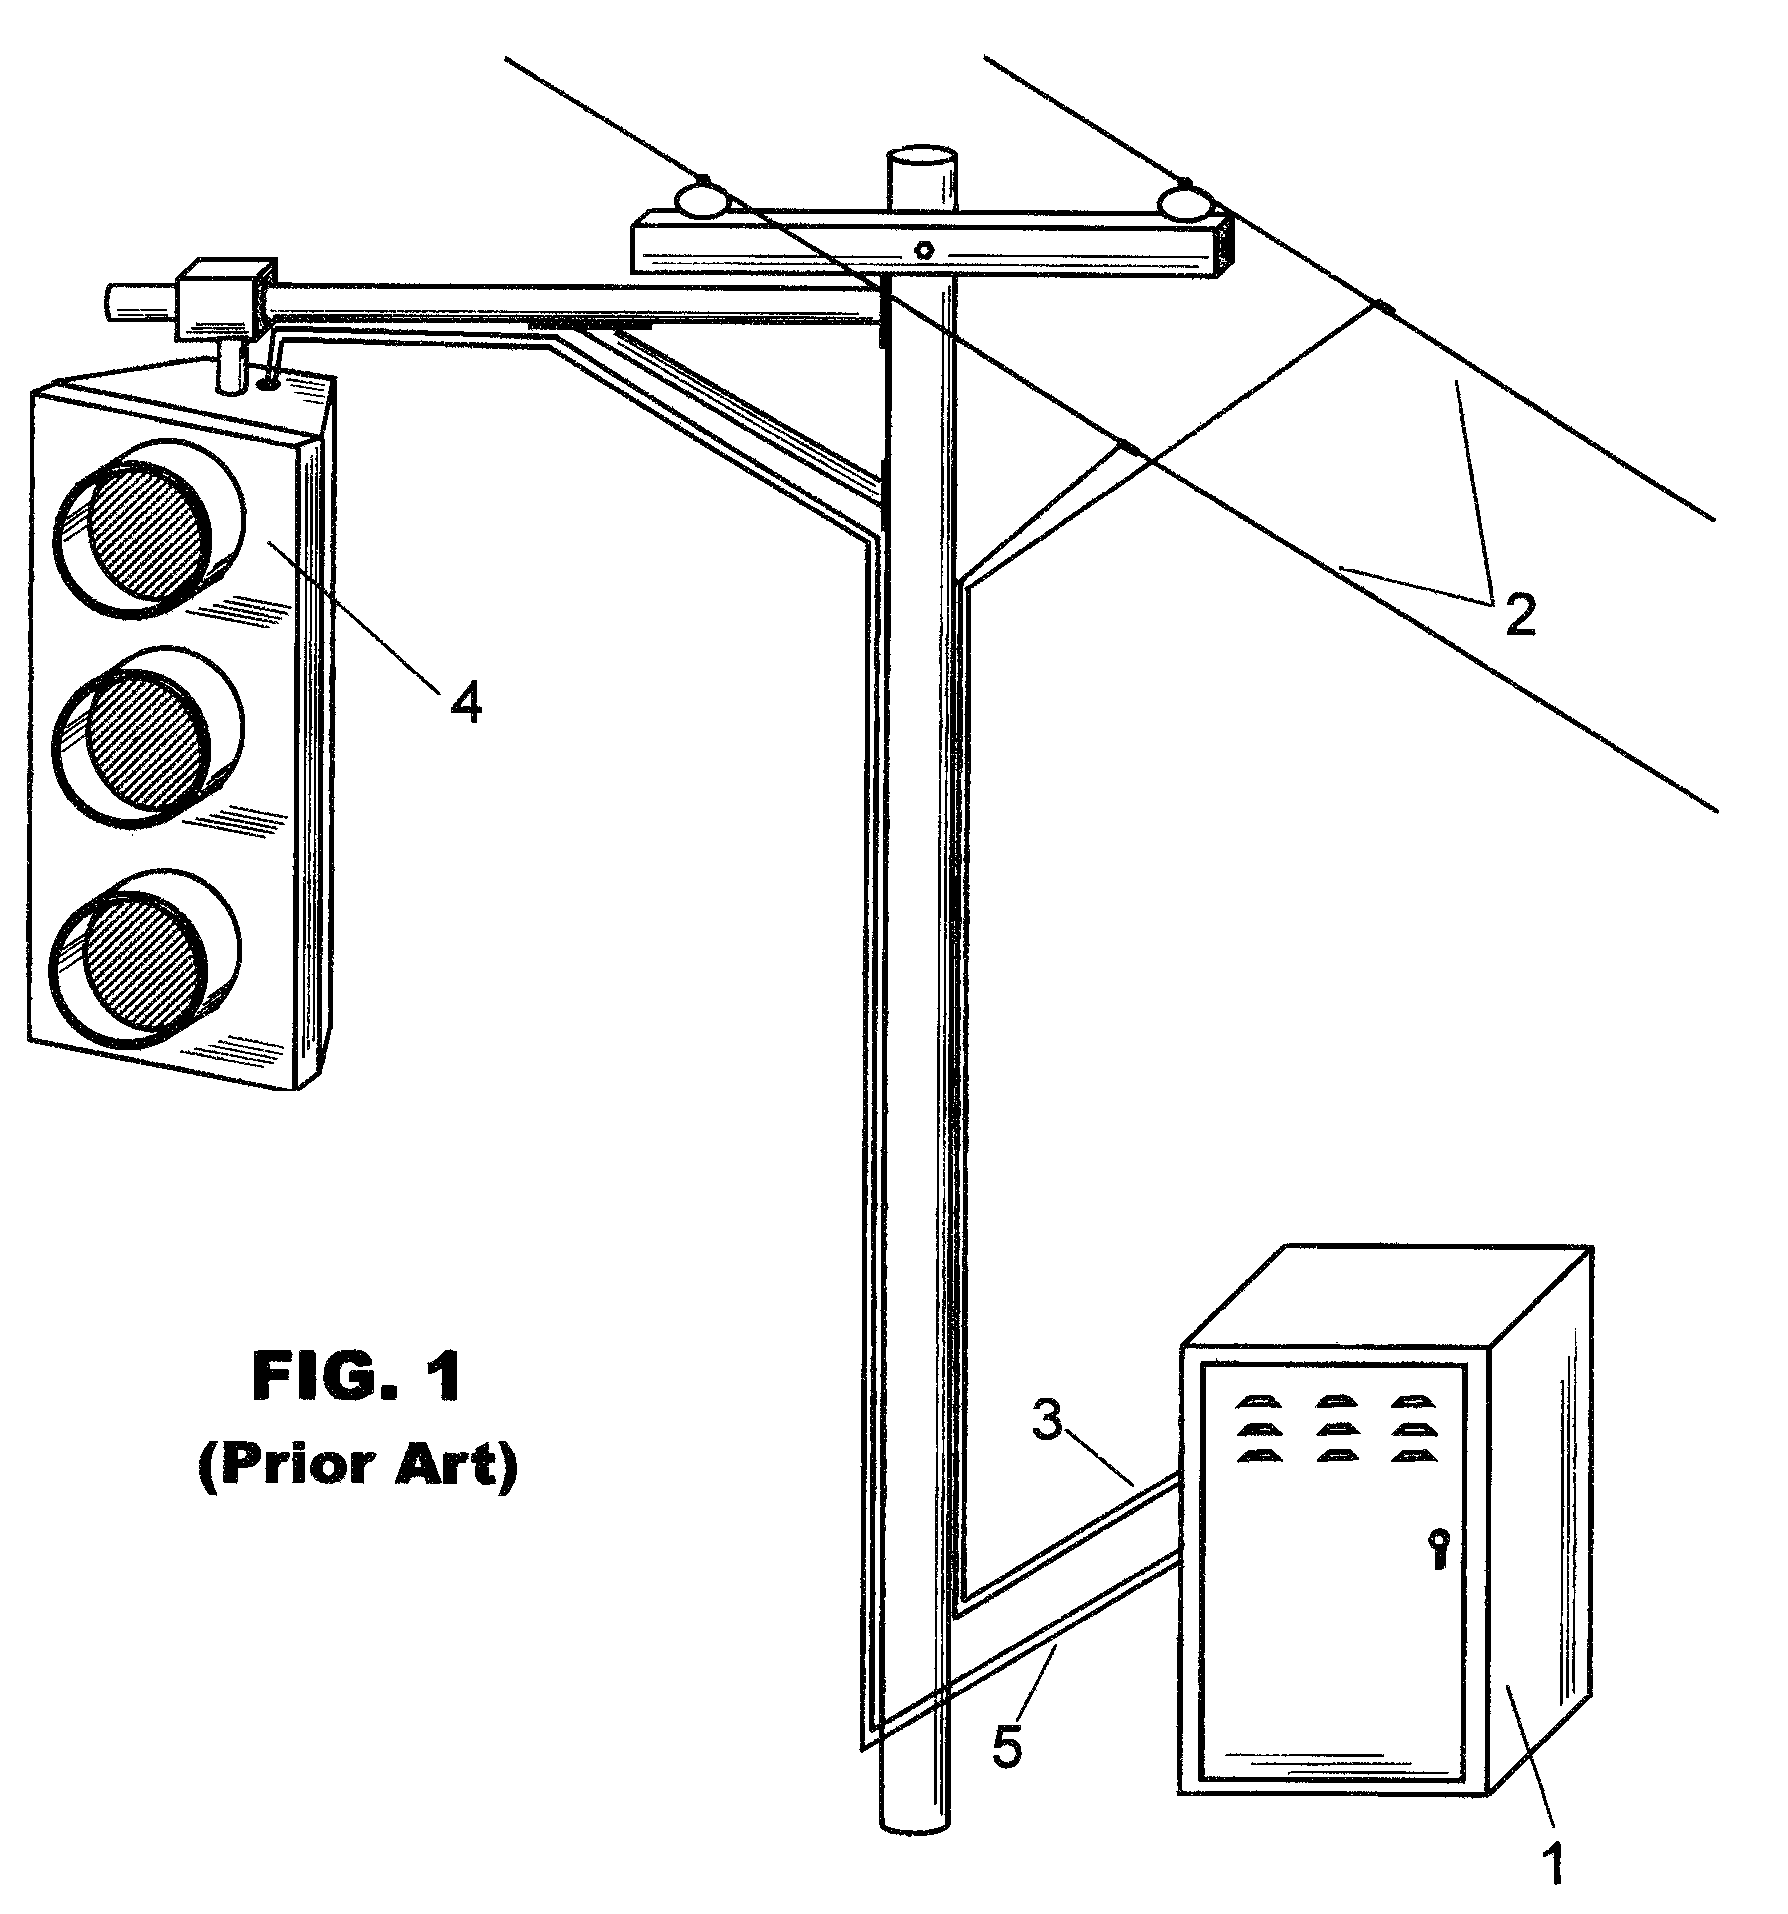 Method and apparatus for controlling temporary traffic signals